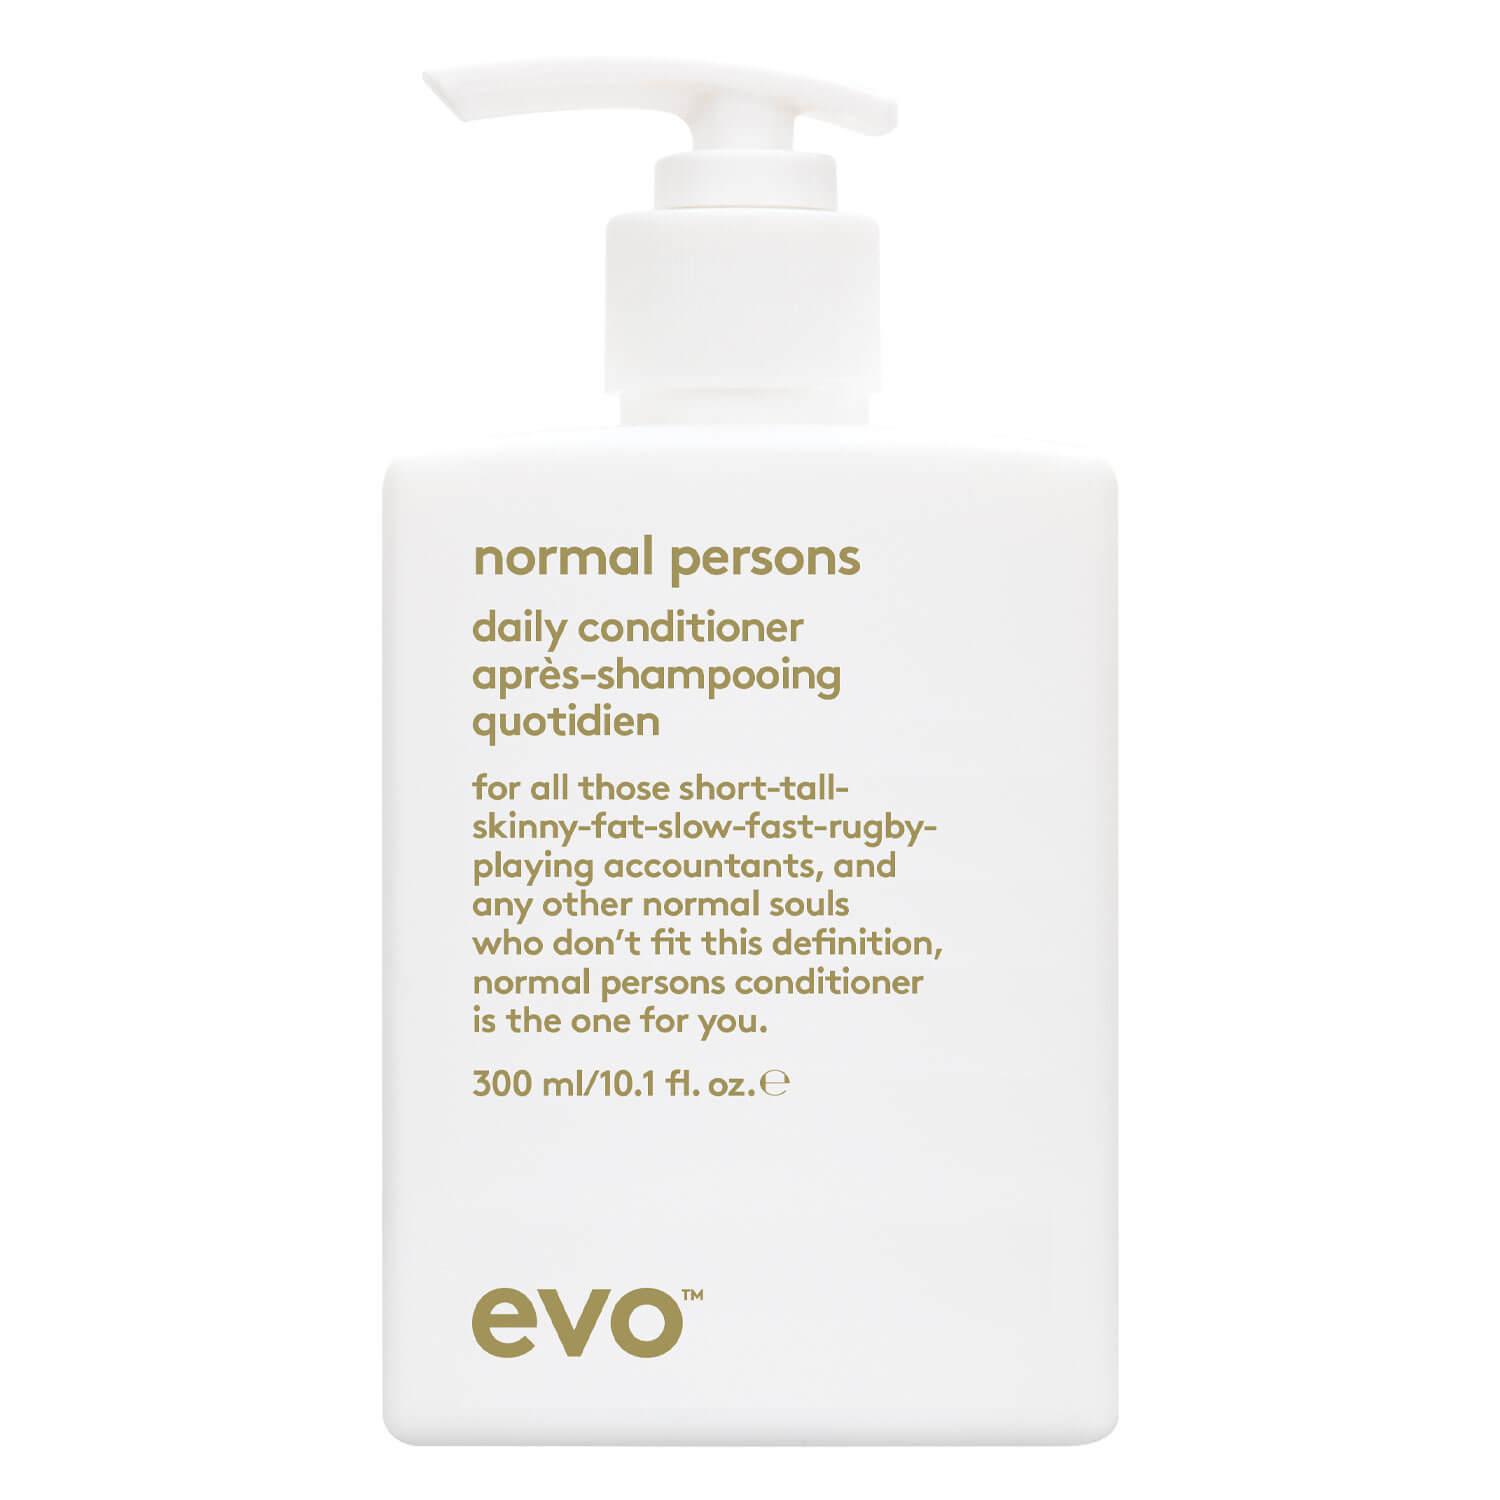 evo care - normal persons daily conditioner